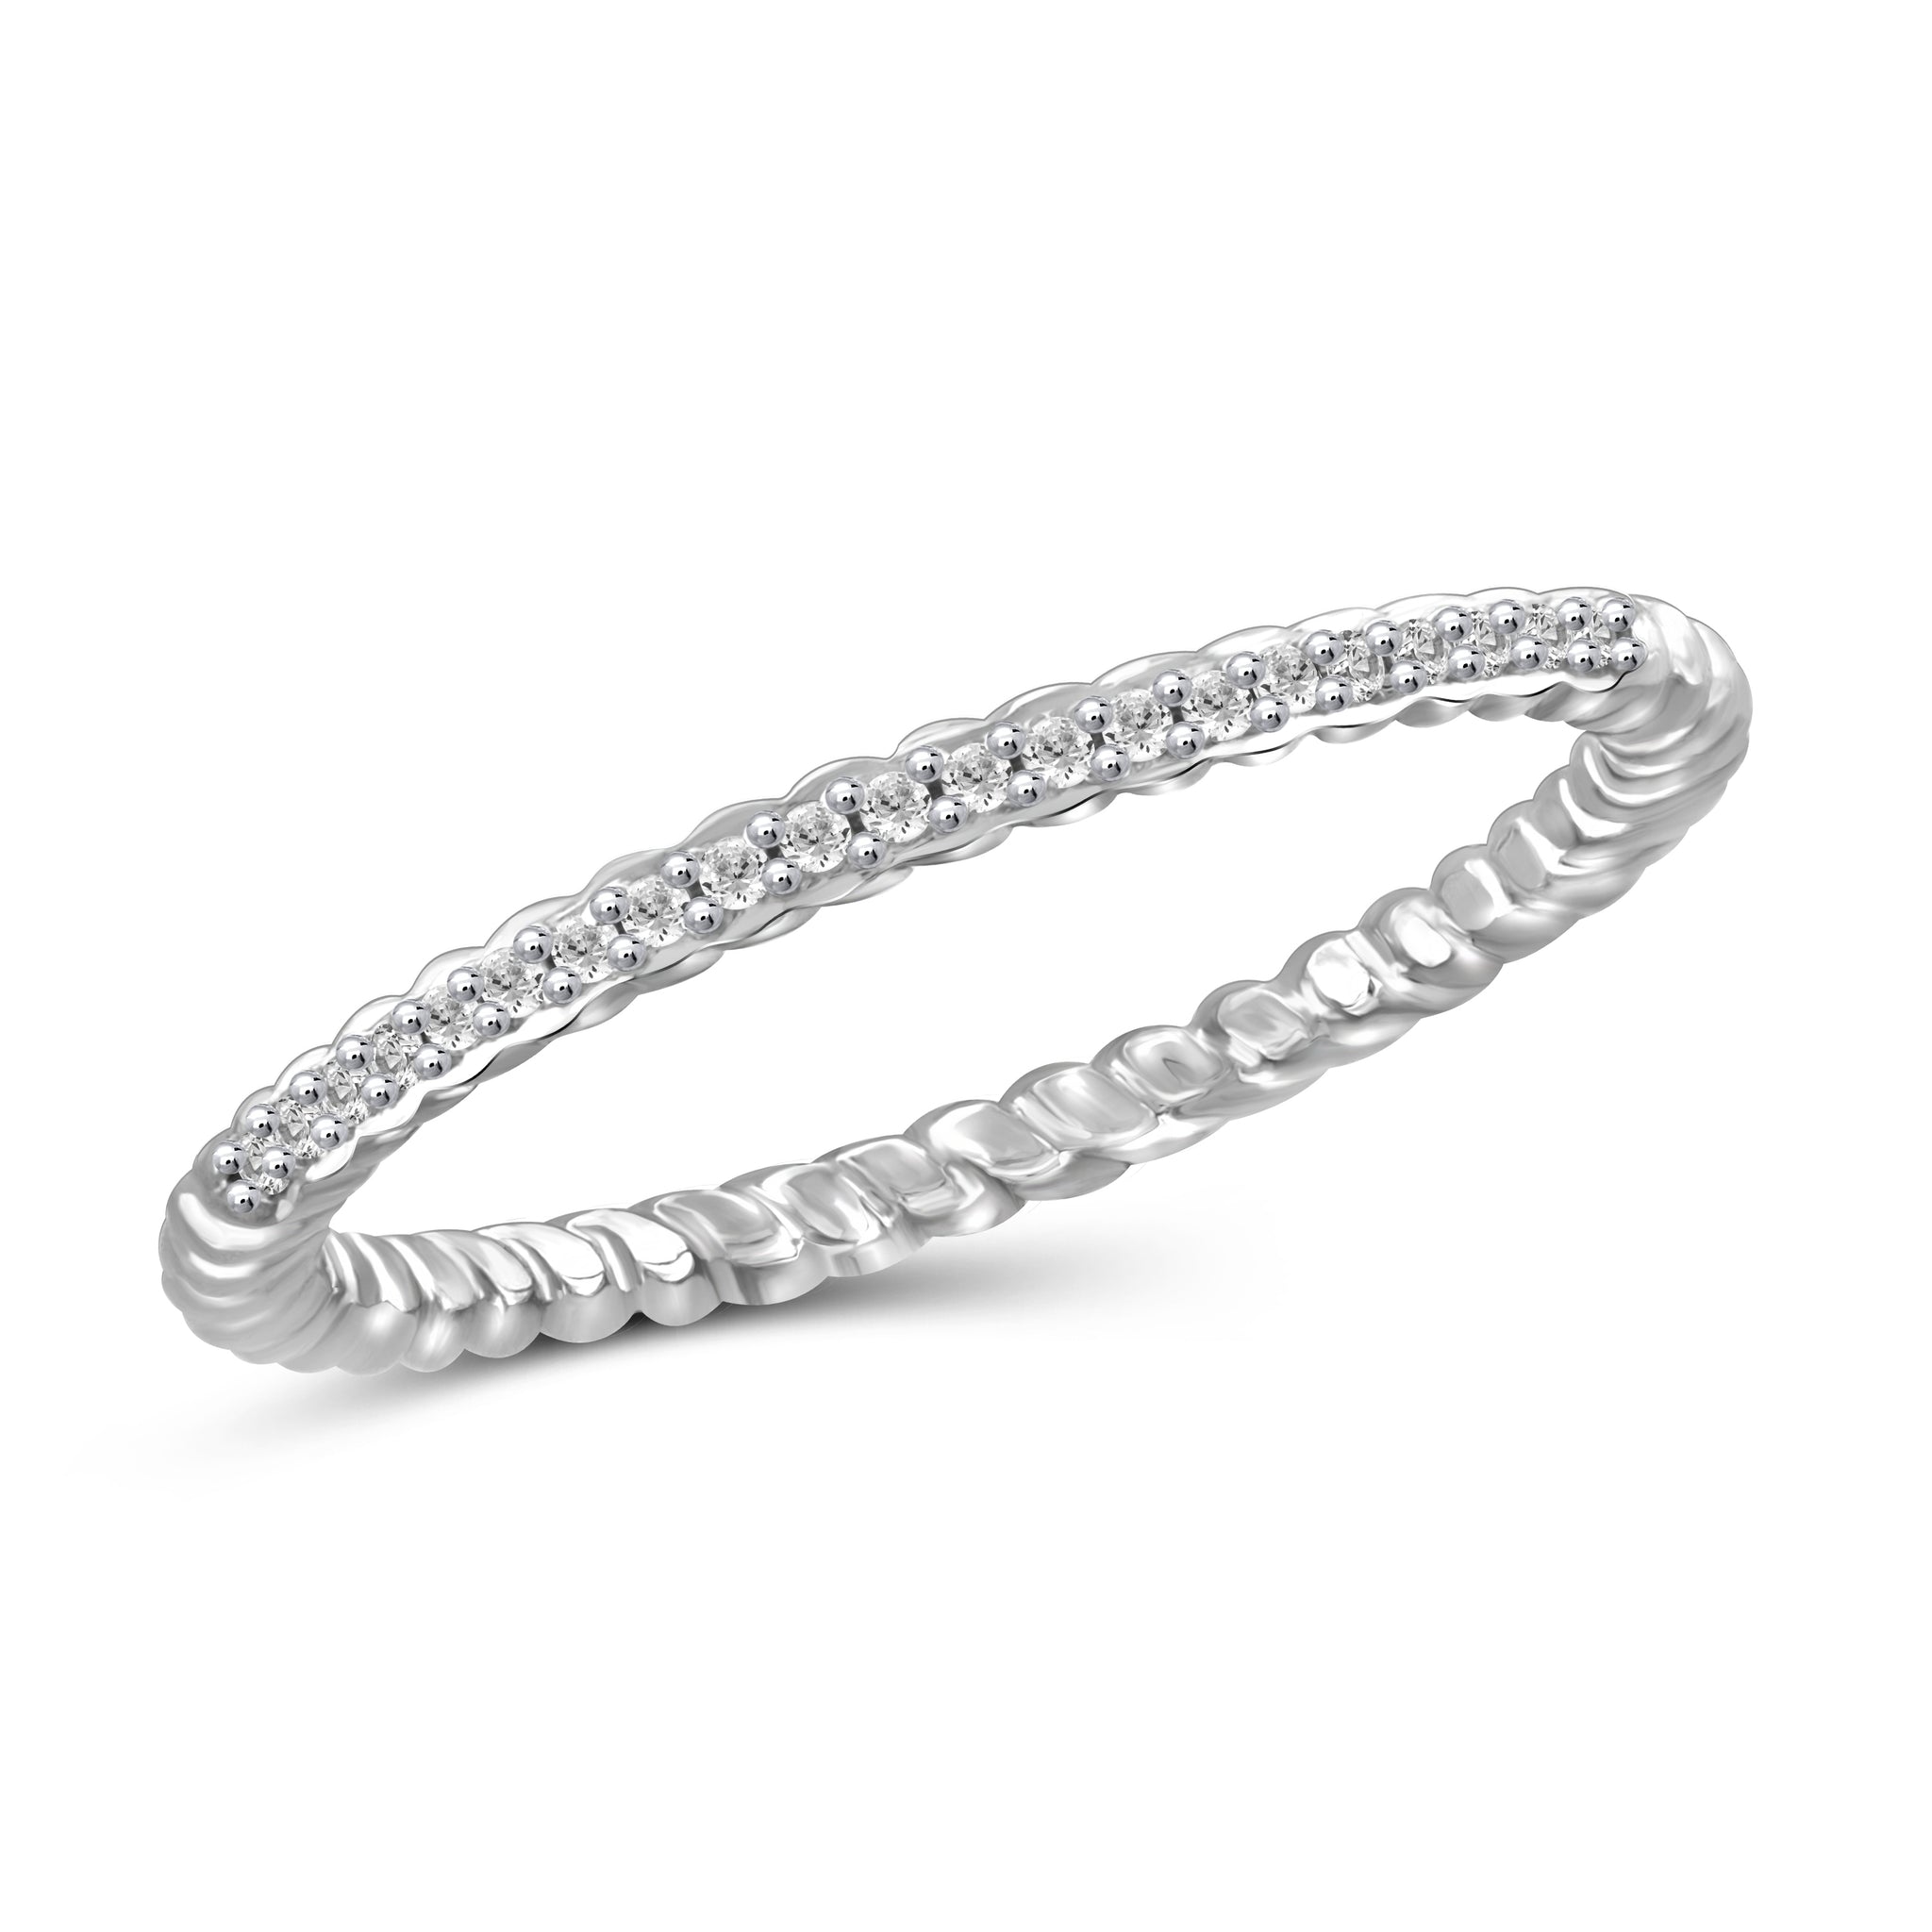 JewelonFire 1/10 Carat T.W. White Diamond Sterling Silver Stackable Band (Size 7 Only) - Assorted Colors